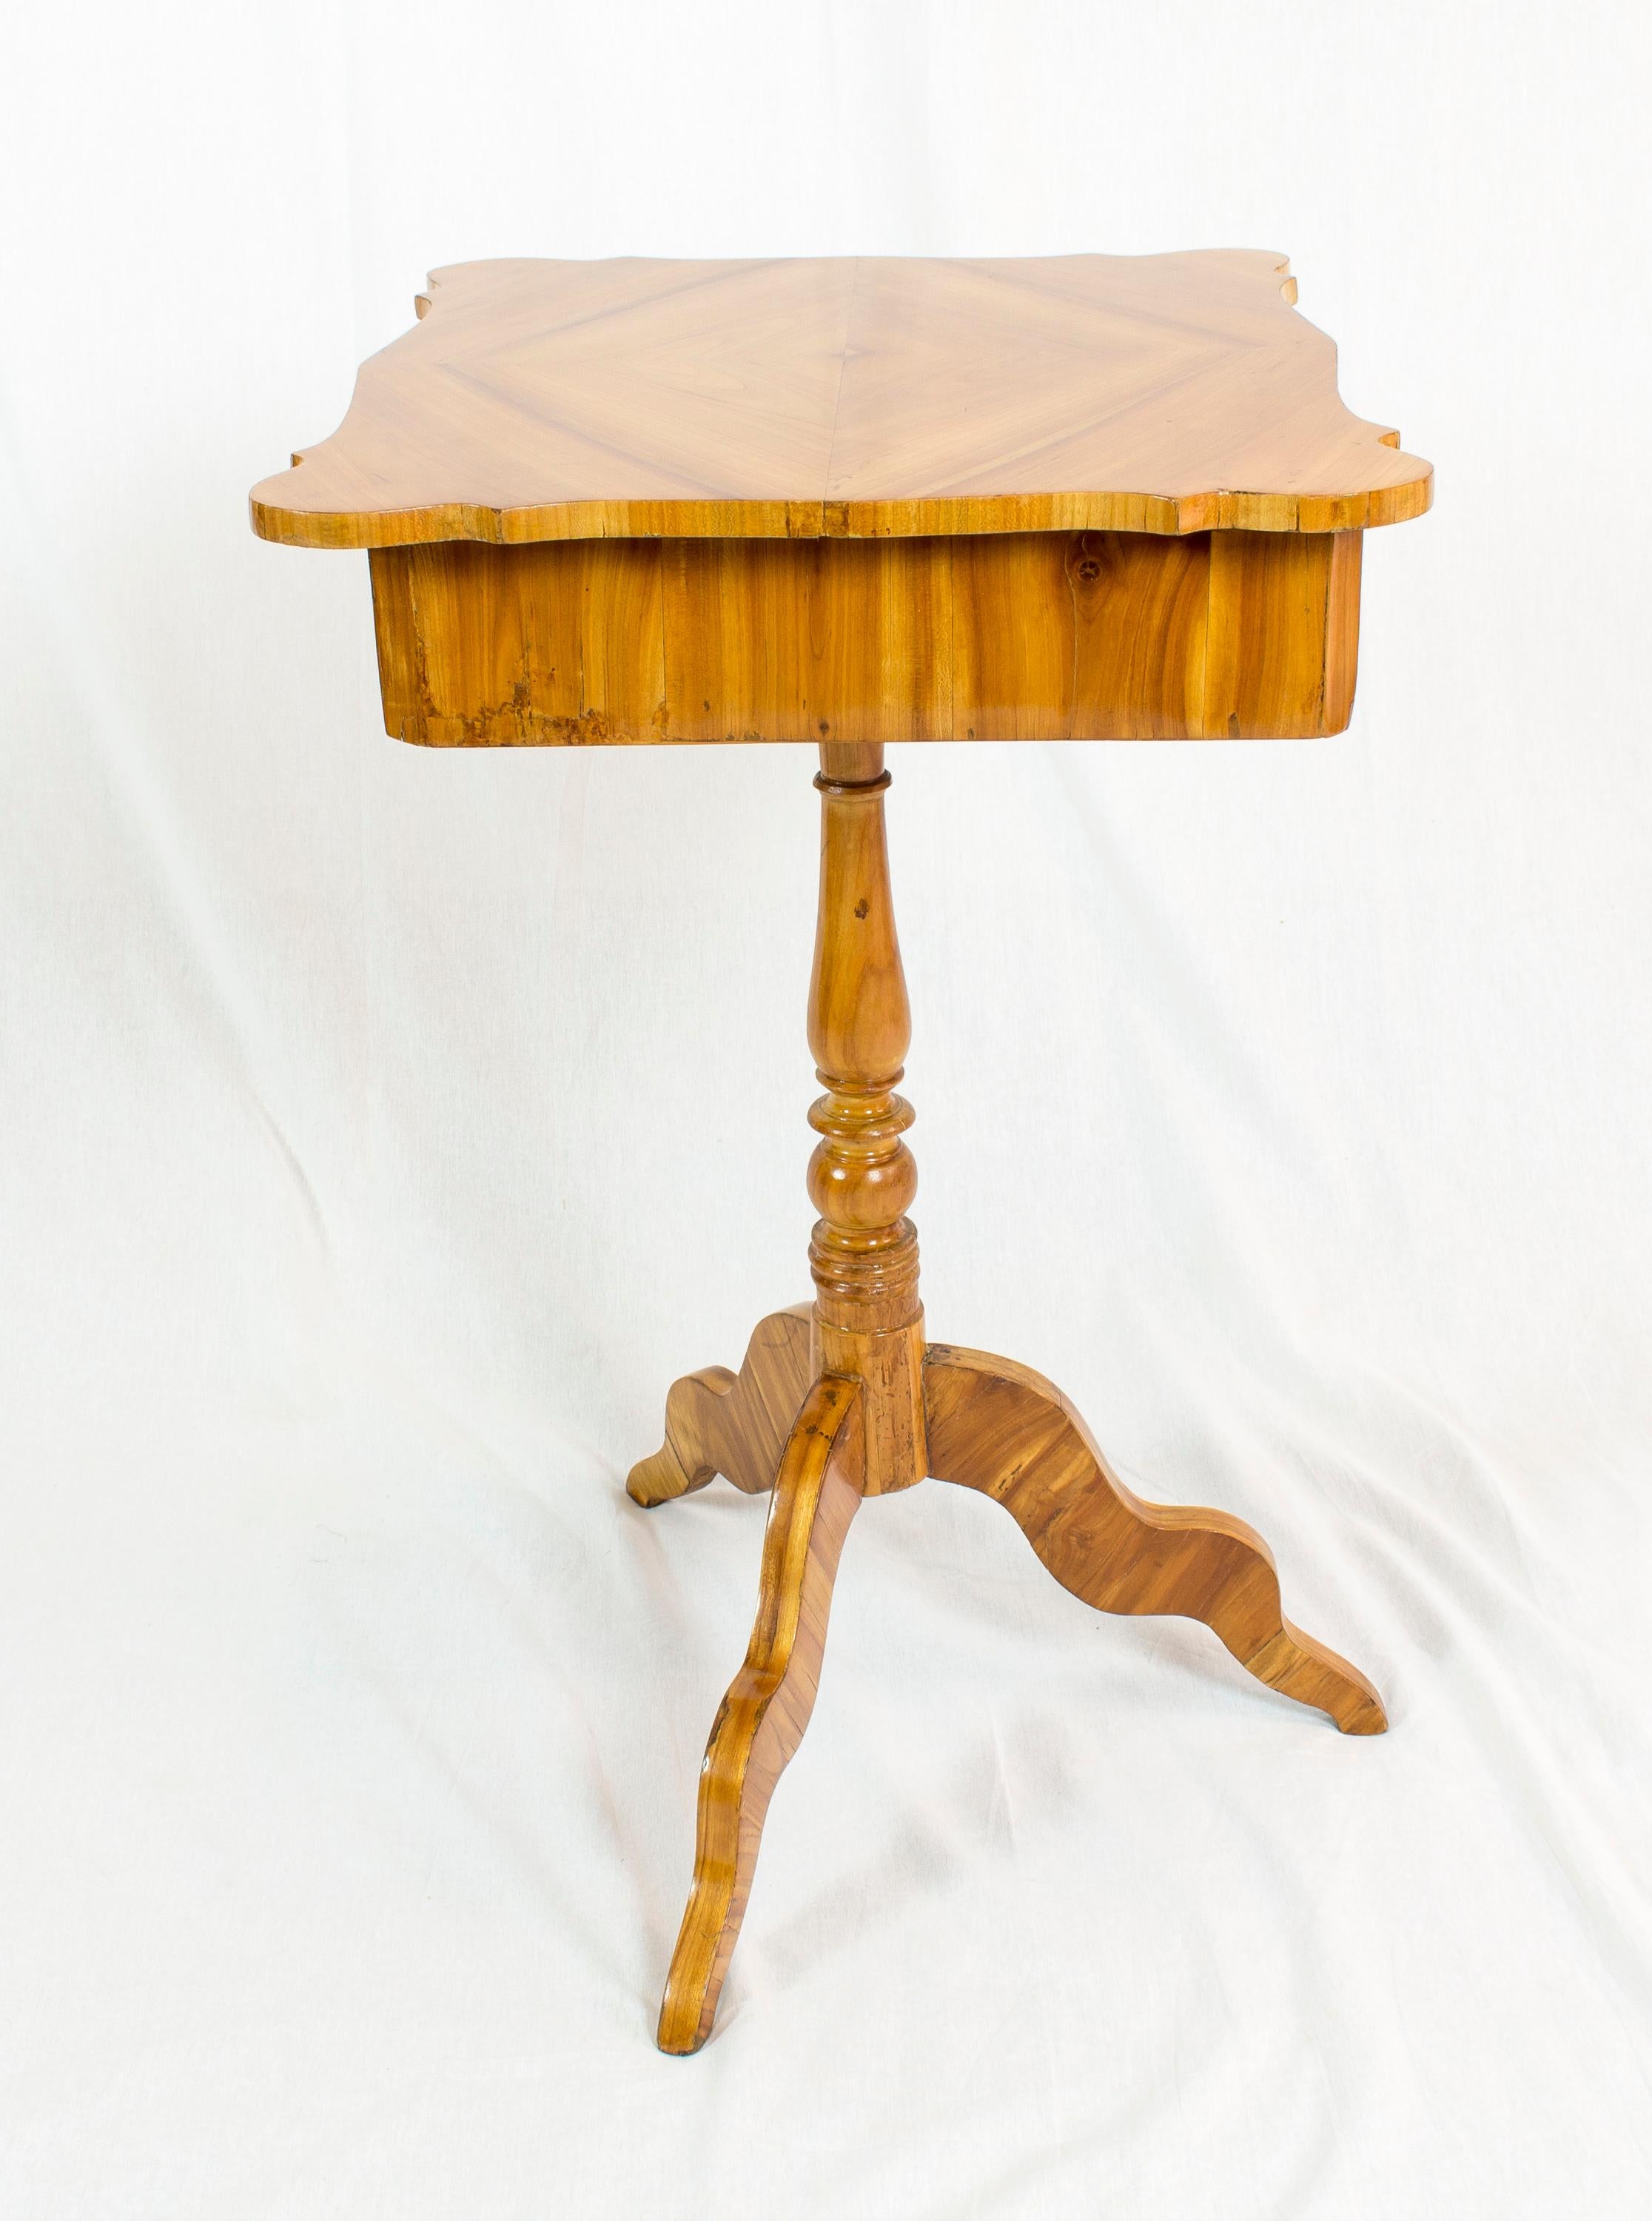 Beautiful sewing or side table made of cherrywood veneer on spruce body. The table dates back to the time of Louis Philippe period / late Biedermeier, more specifically from the time, circa 1845. In very good restored condition.